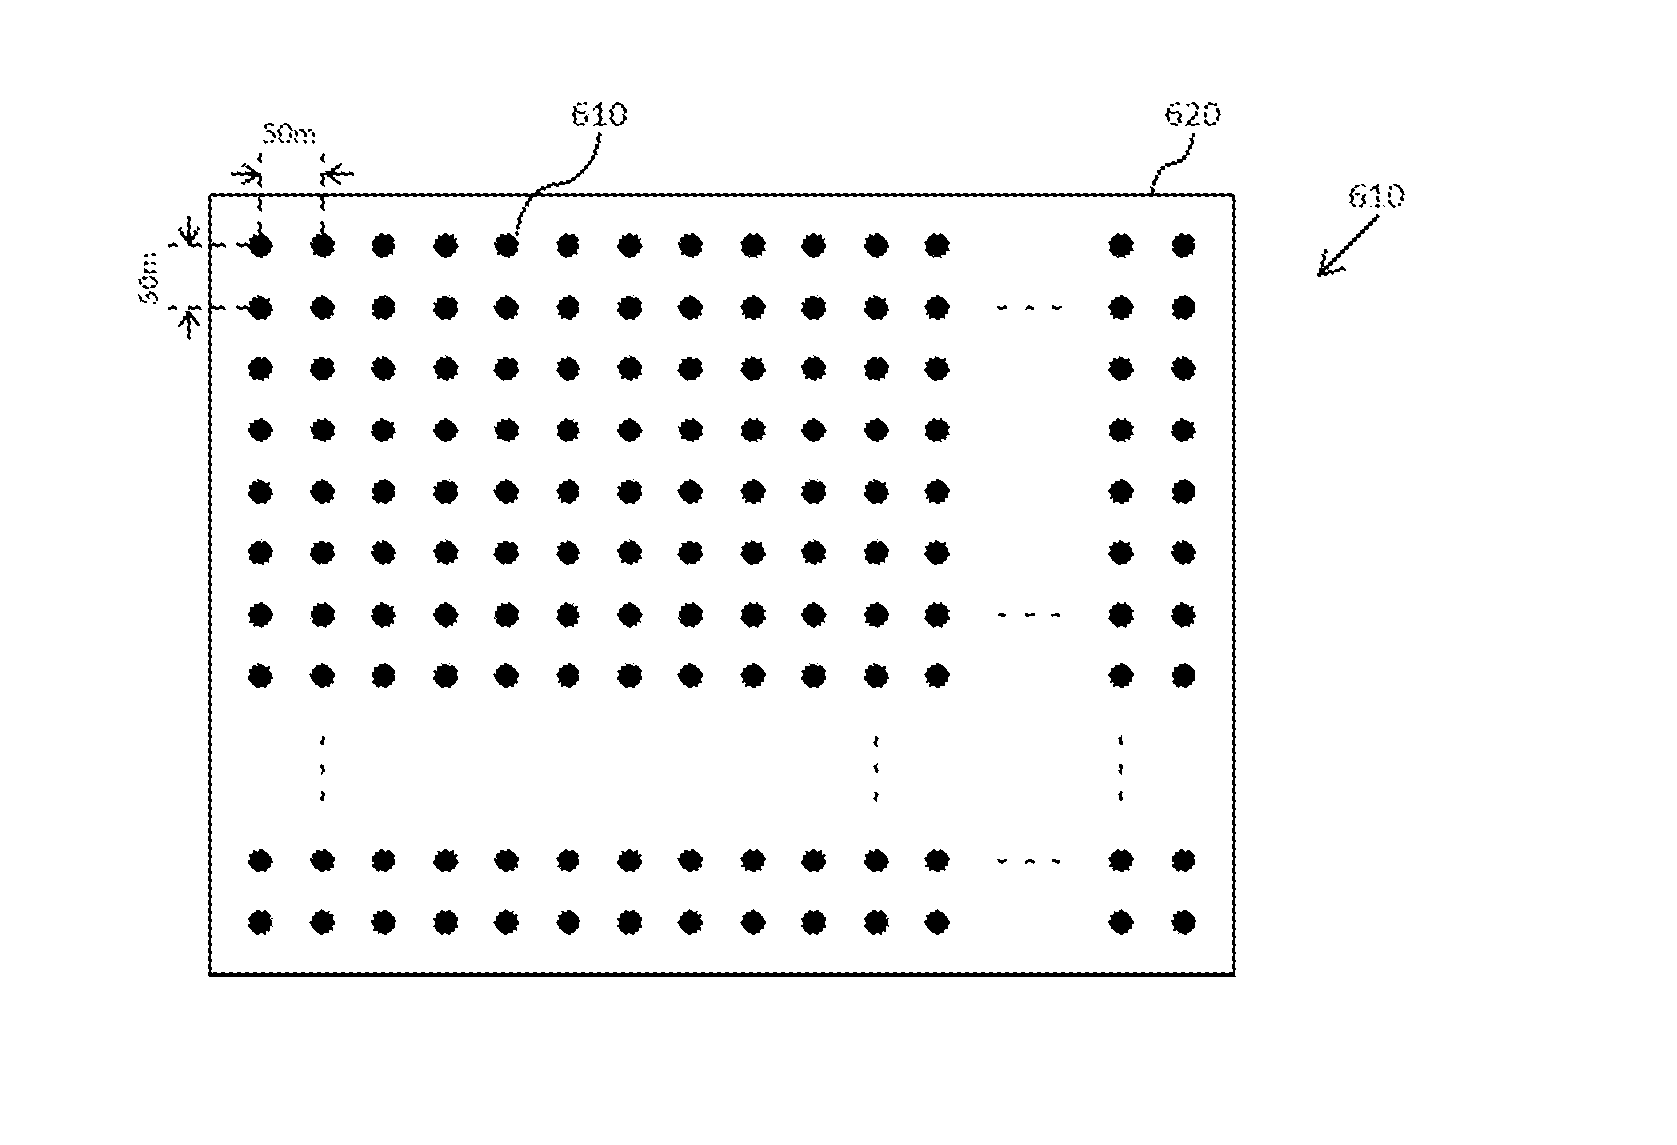 Method and apparatus for deriving signal strength attenuation characteristic values